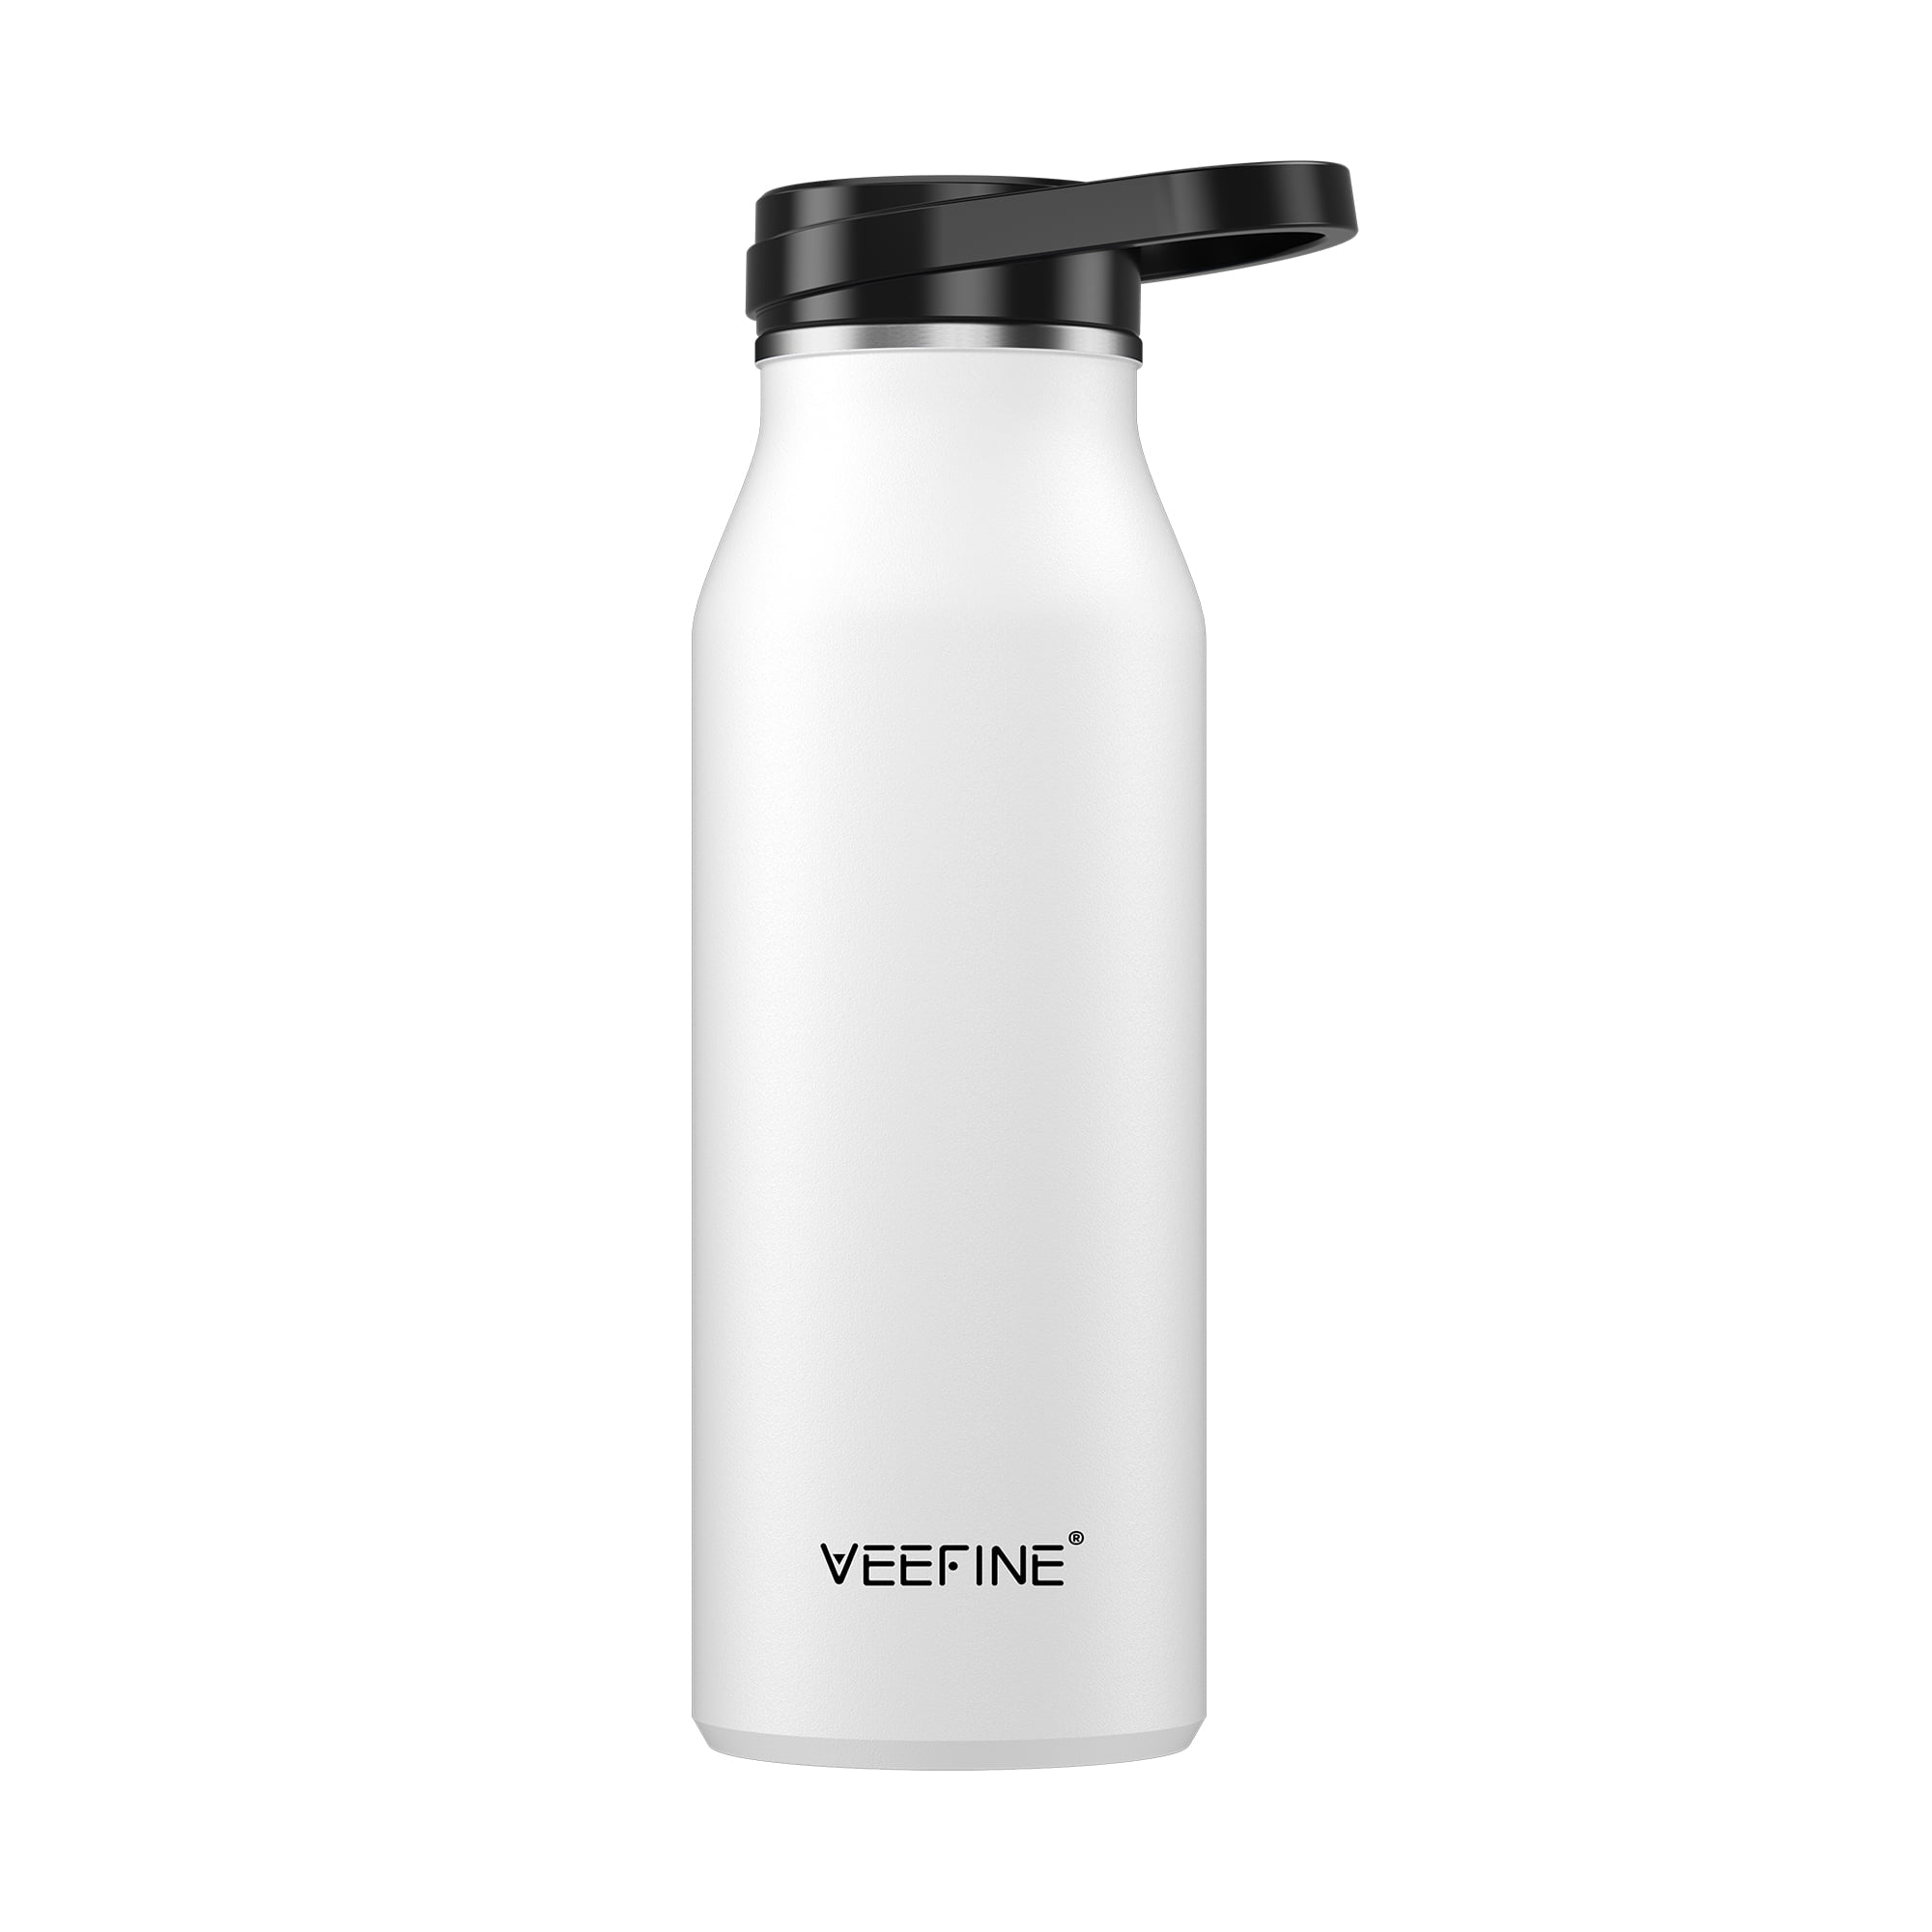 VeeFine Insulated Water Bottle Stainless Steel Water Bottles BPA-Free Dishwasher Safe 20/32/40oz Wide Mouth Lid Eco-Friendly Thermos for Hiking Camping and Travel